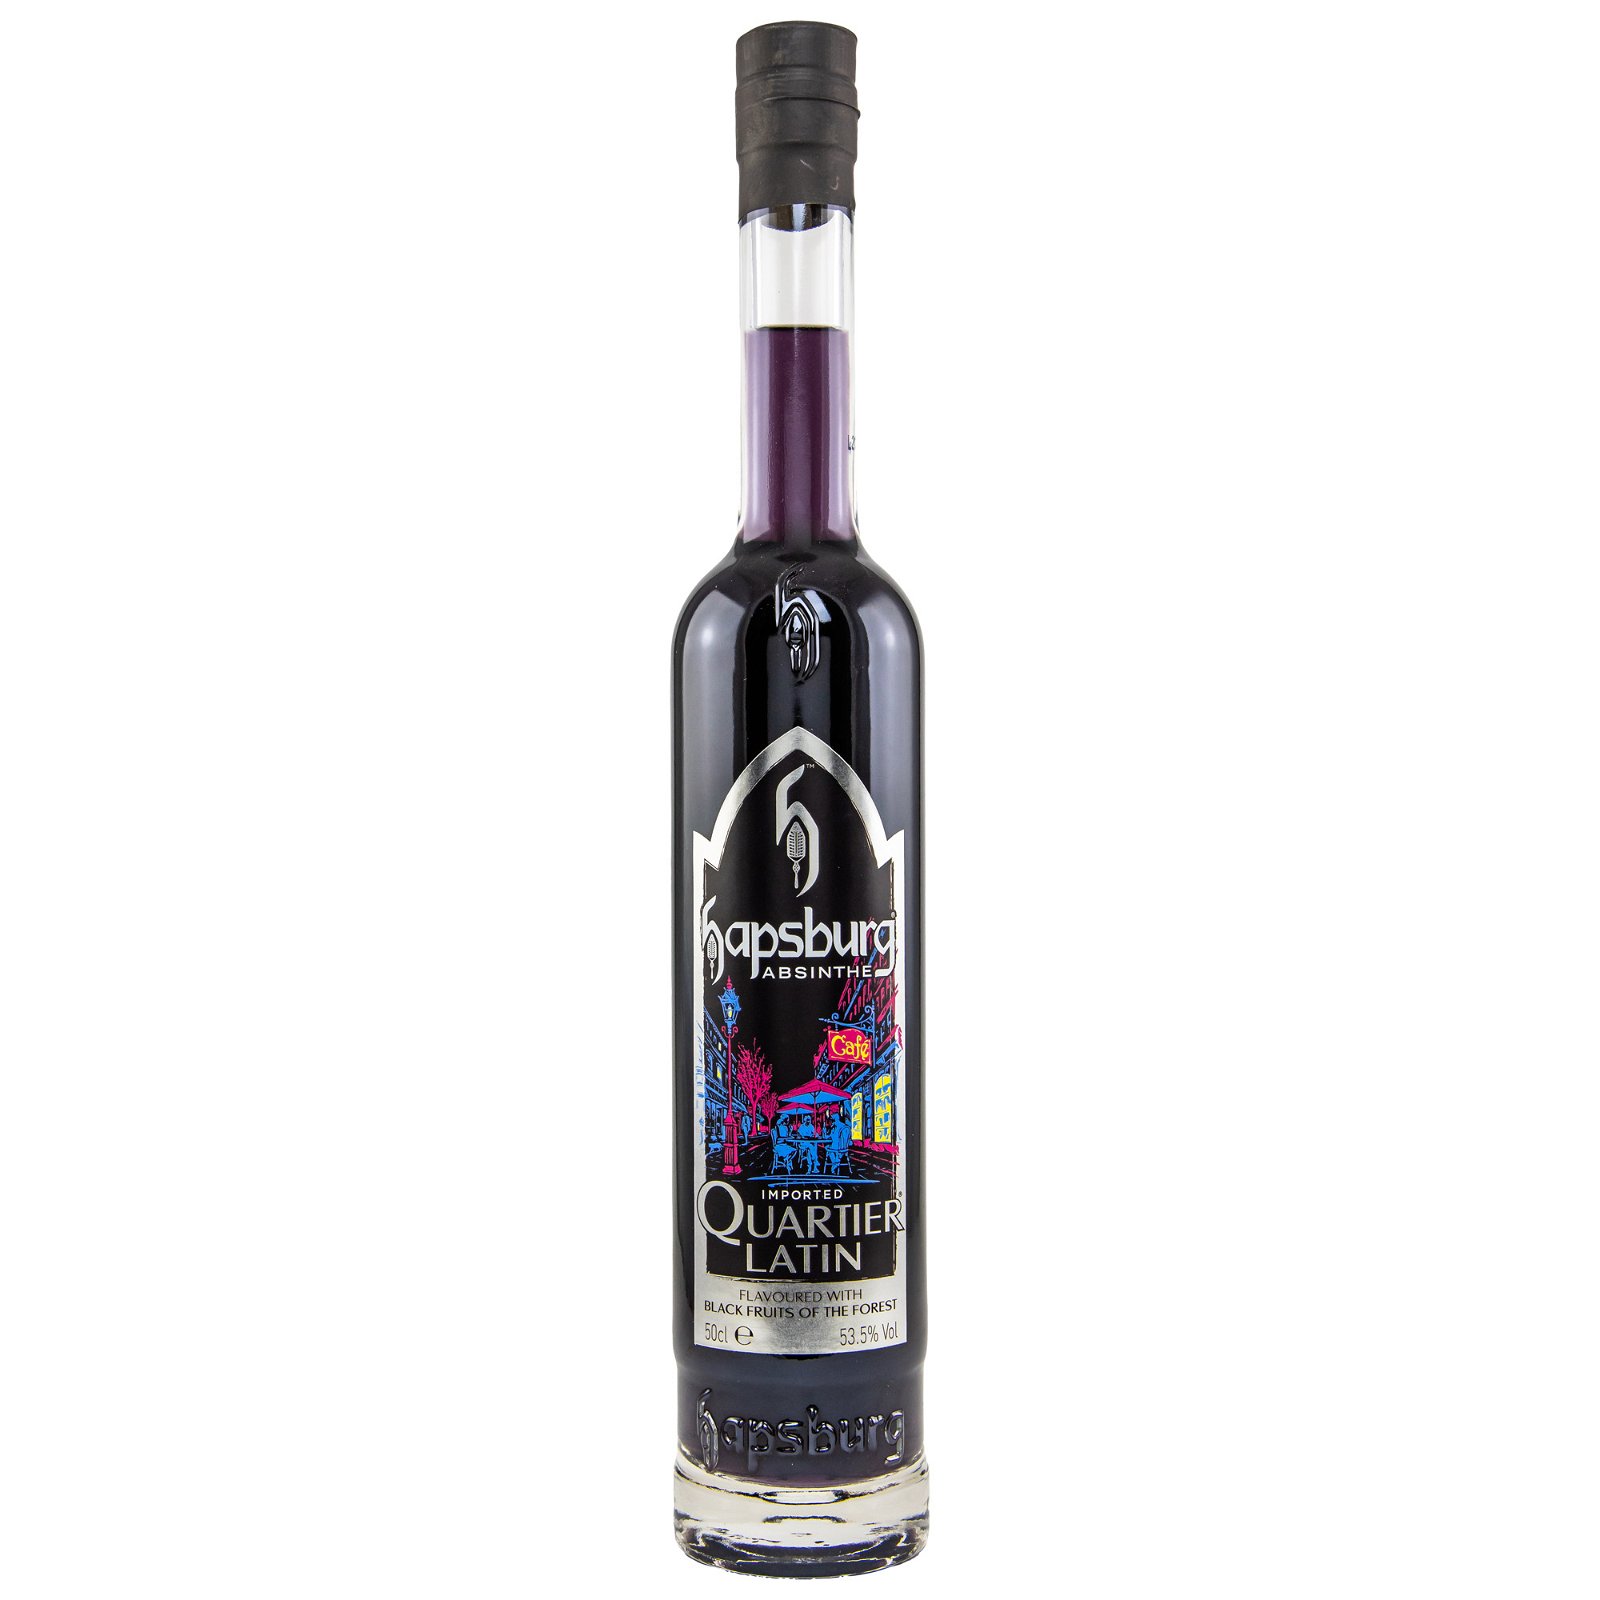 Hapsburg Absinthe Black Fruits Of The Forest Quartier Latin